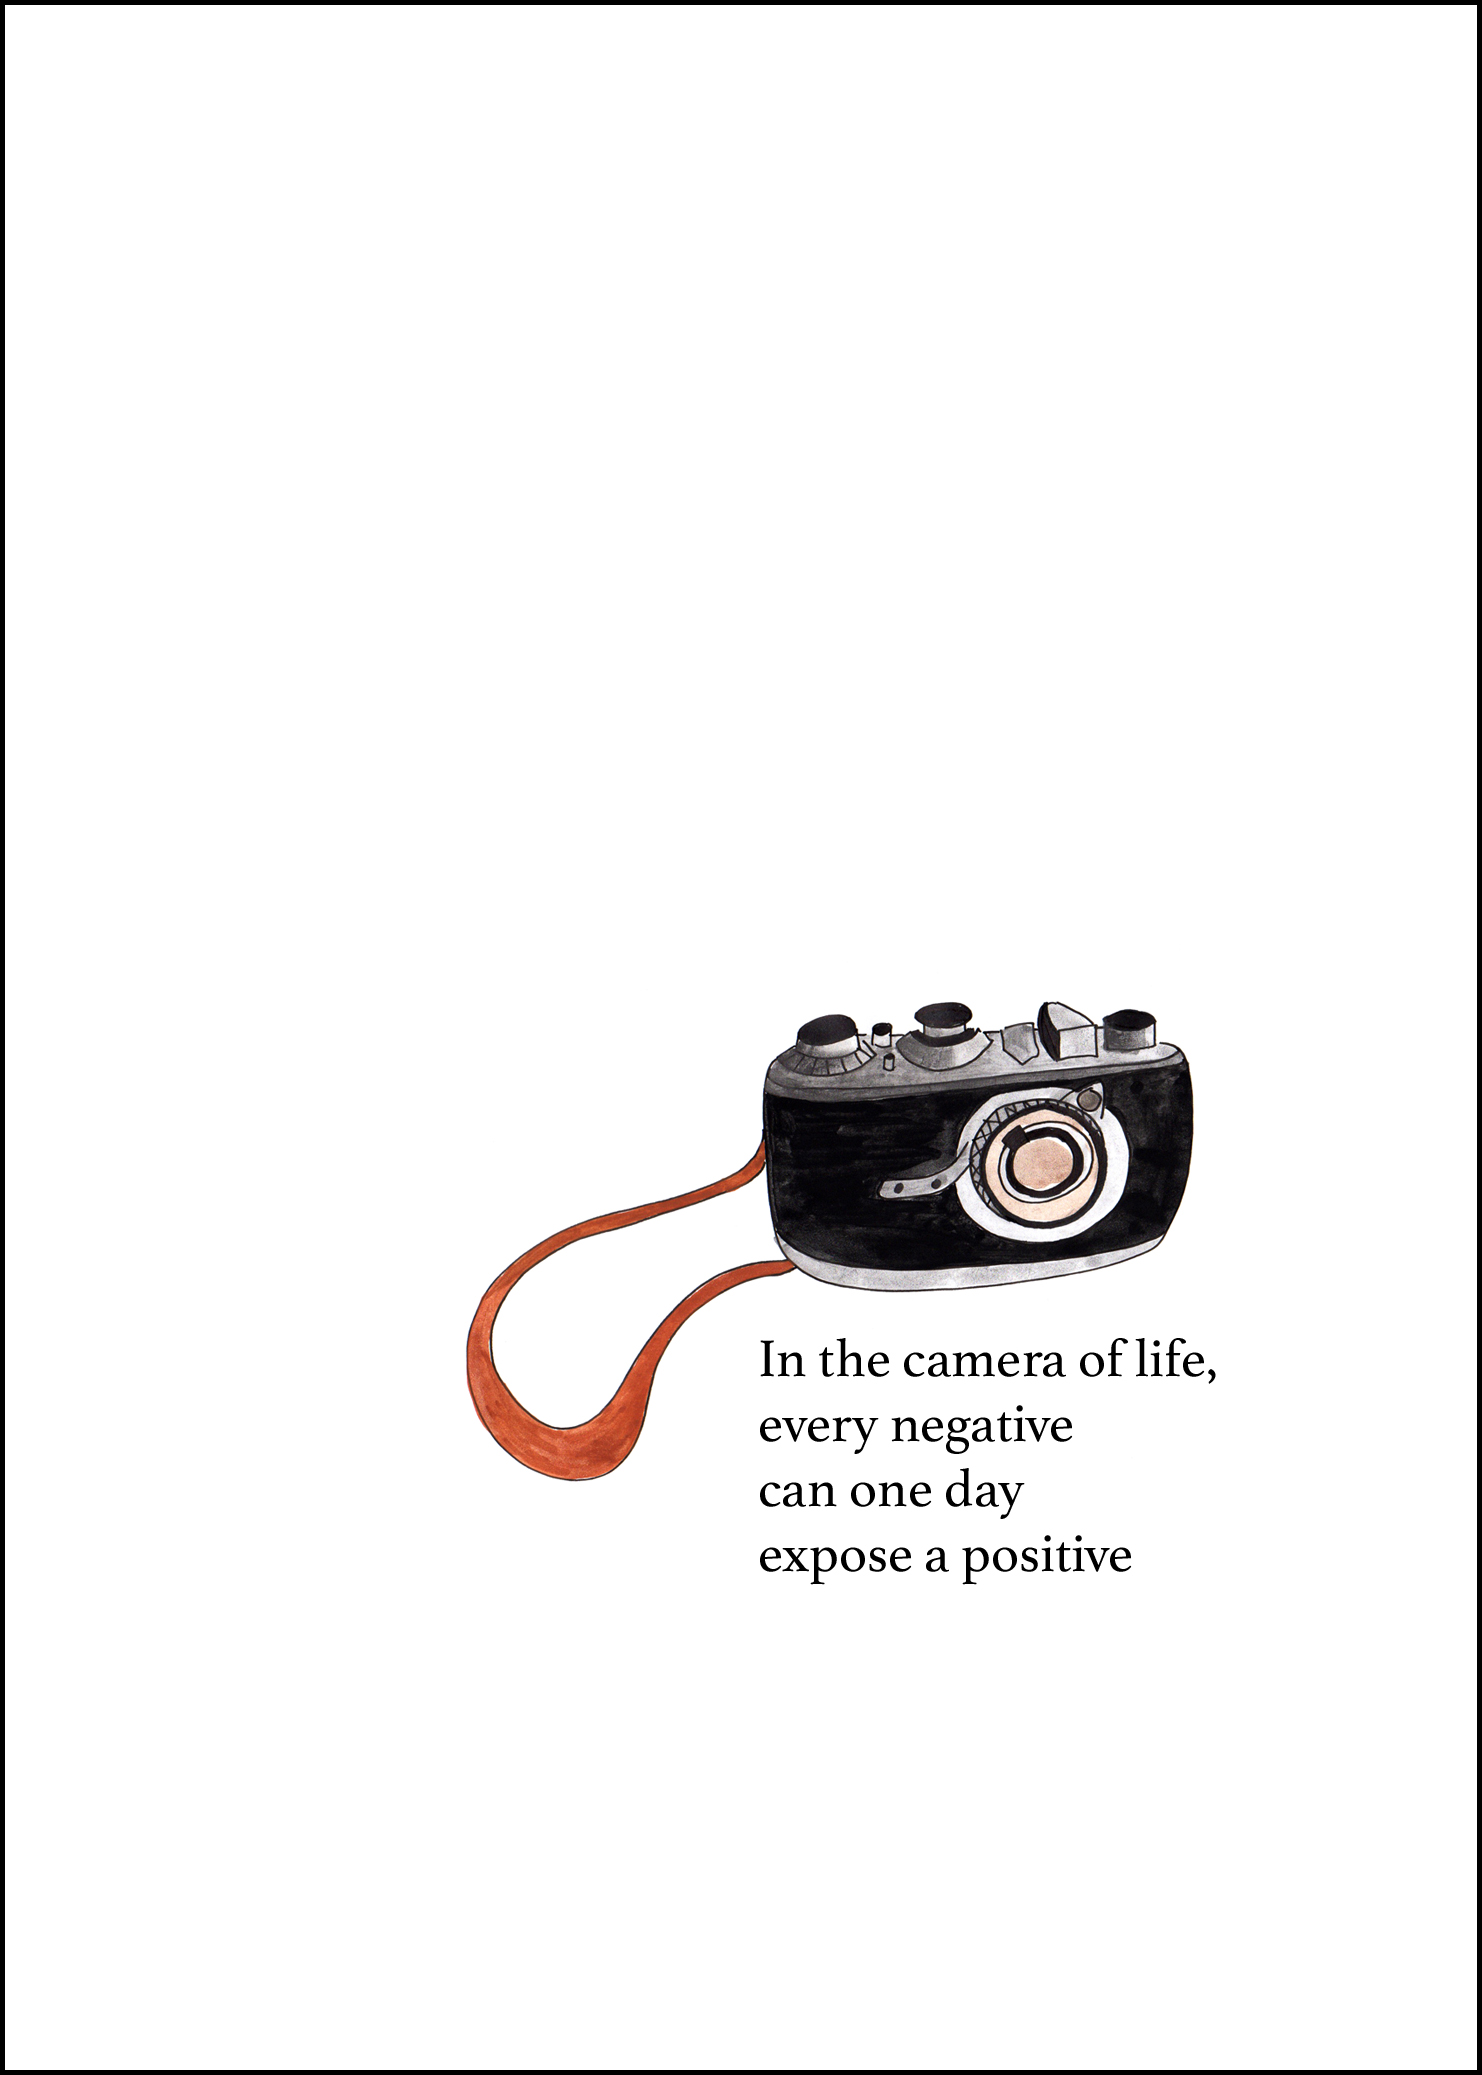 Camera of Life - by Anna Elkins